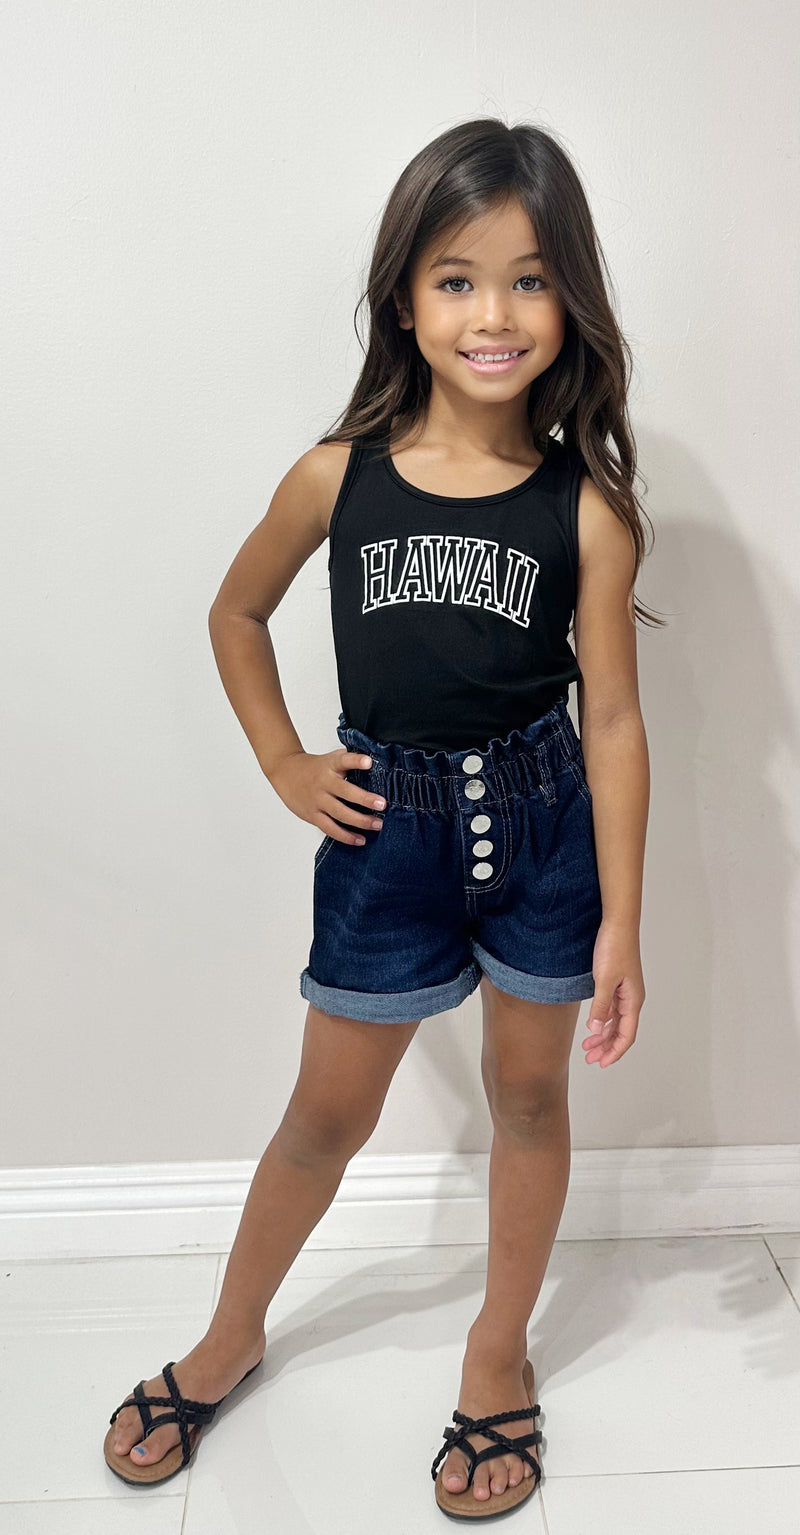 Jeans Warehouse Hawaii - DENIM SHORTS 4-6X - BE NICE SHORTS | KIDS SIZE 4-6X | By CUTIE PATOOTIE